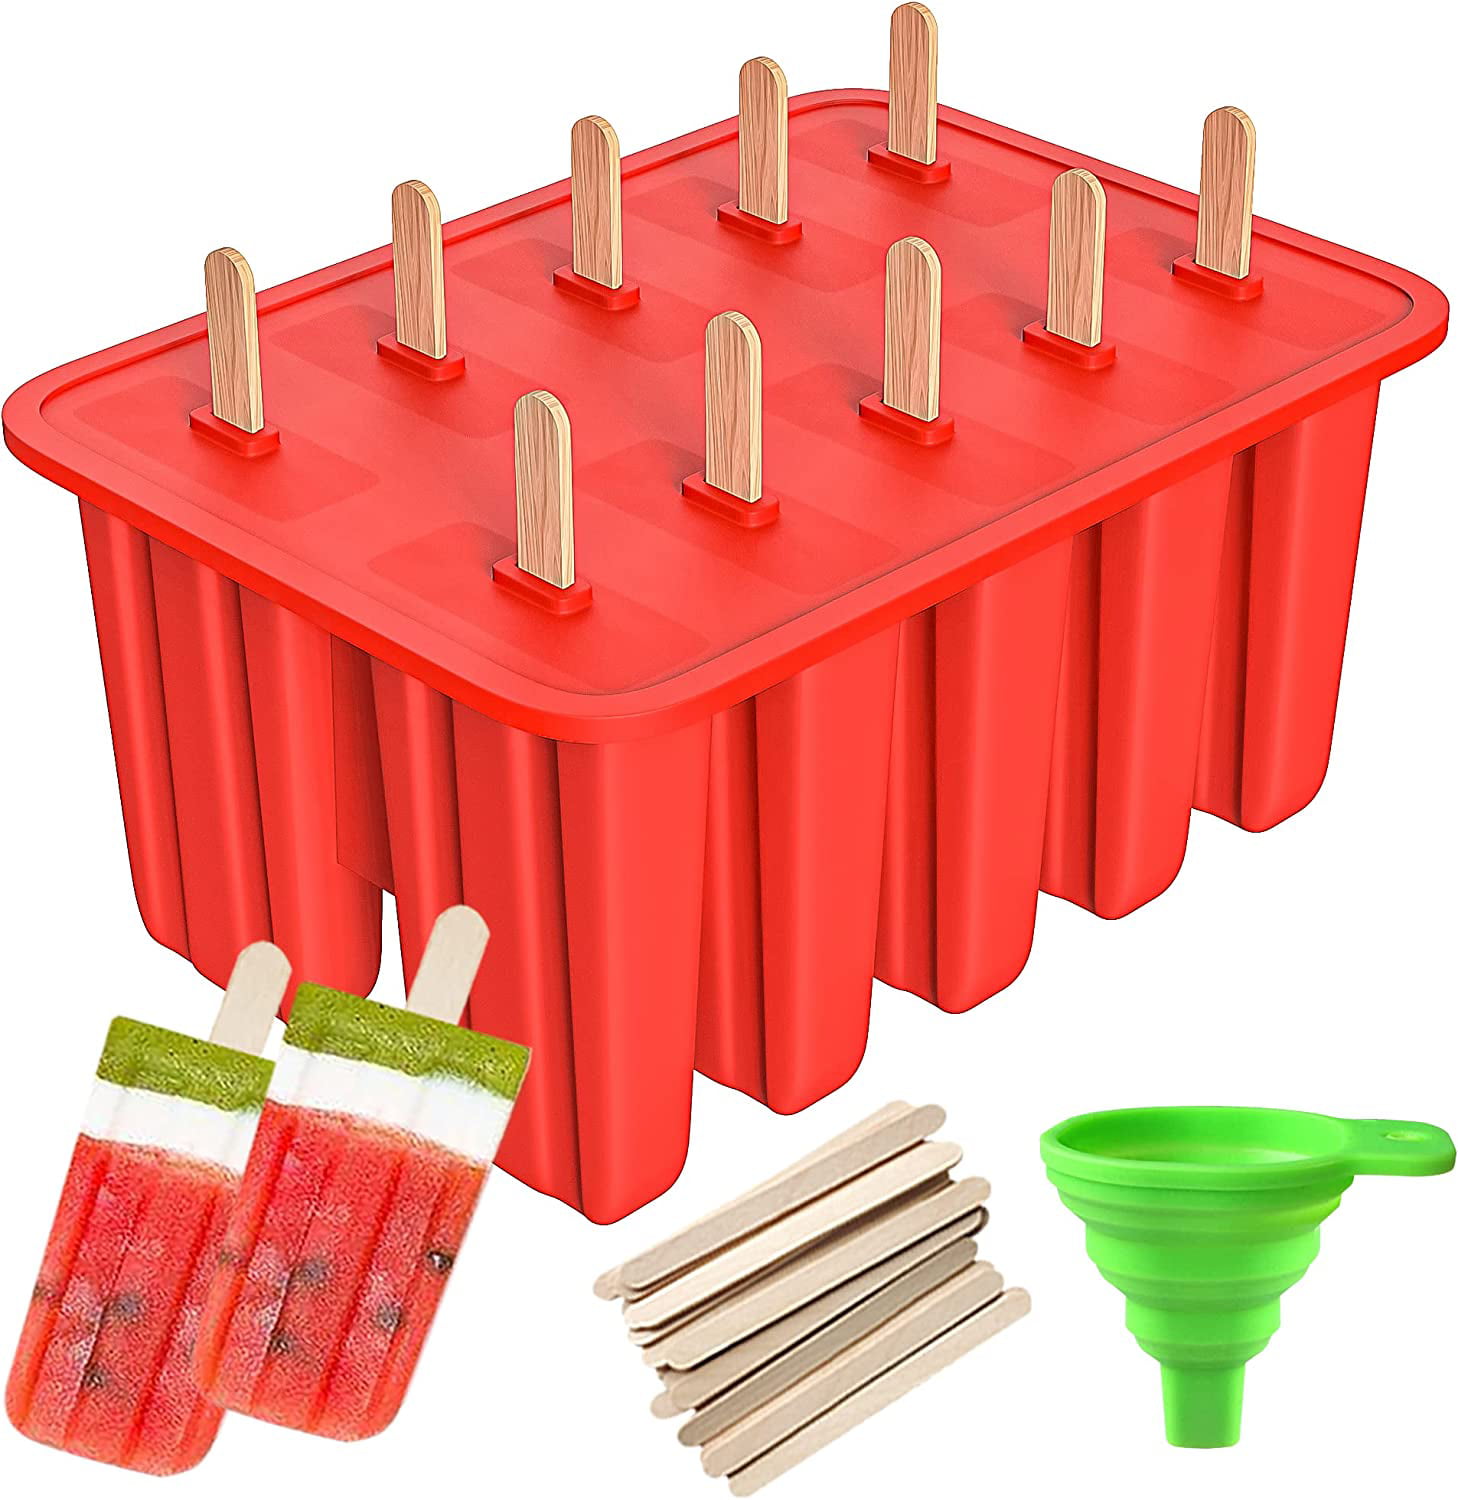 Popsicles Molds, 10 Food Grade Popsicle Maker with 50 Popsicle Sticks & 1  Silicone Funnel, Silicone Popsicle Molds for Kids, Frozen Ice Pop Mold for  Homemade Popsicles 